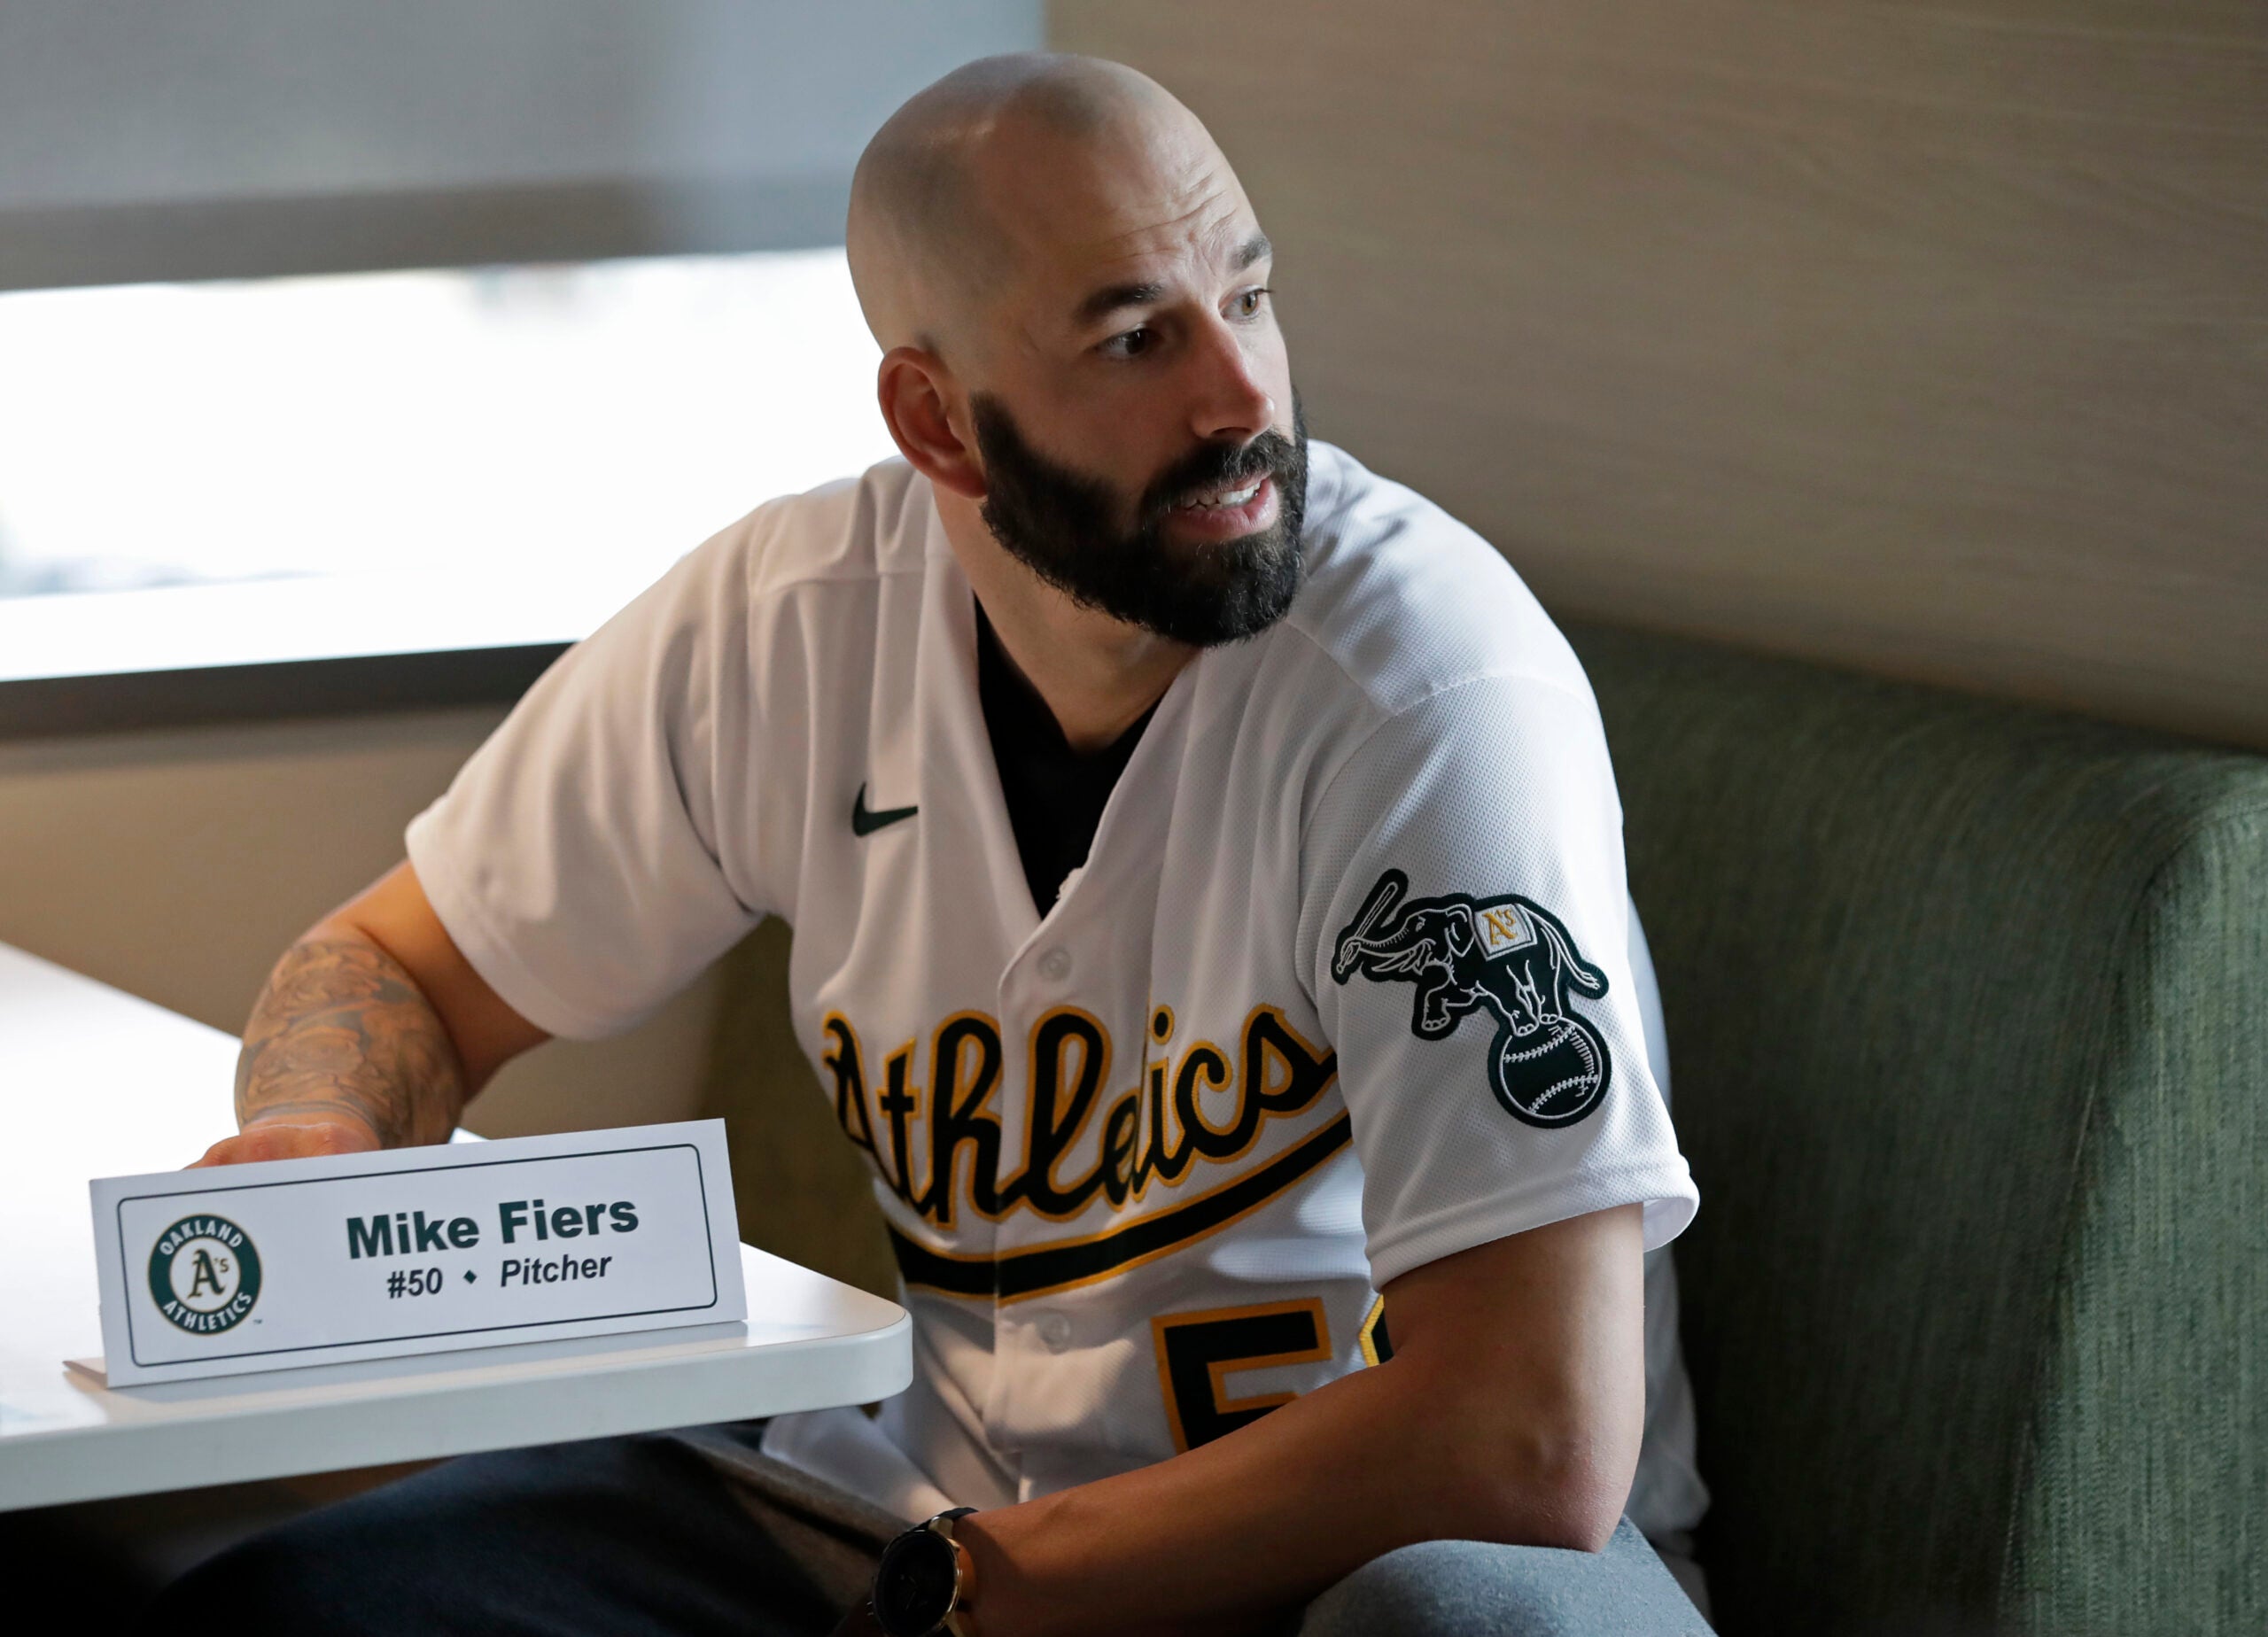 Ex-Astros pitcher Mike Fiers - Team stole signs with camera - ESPN